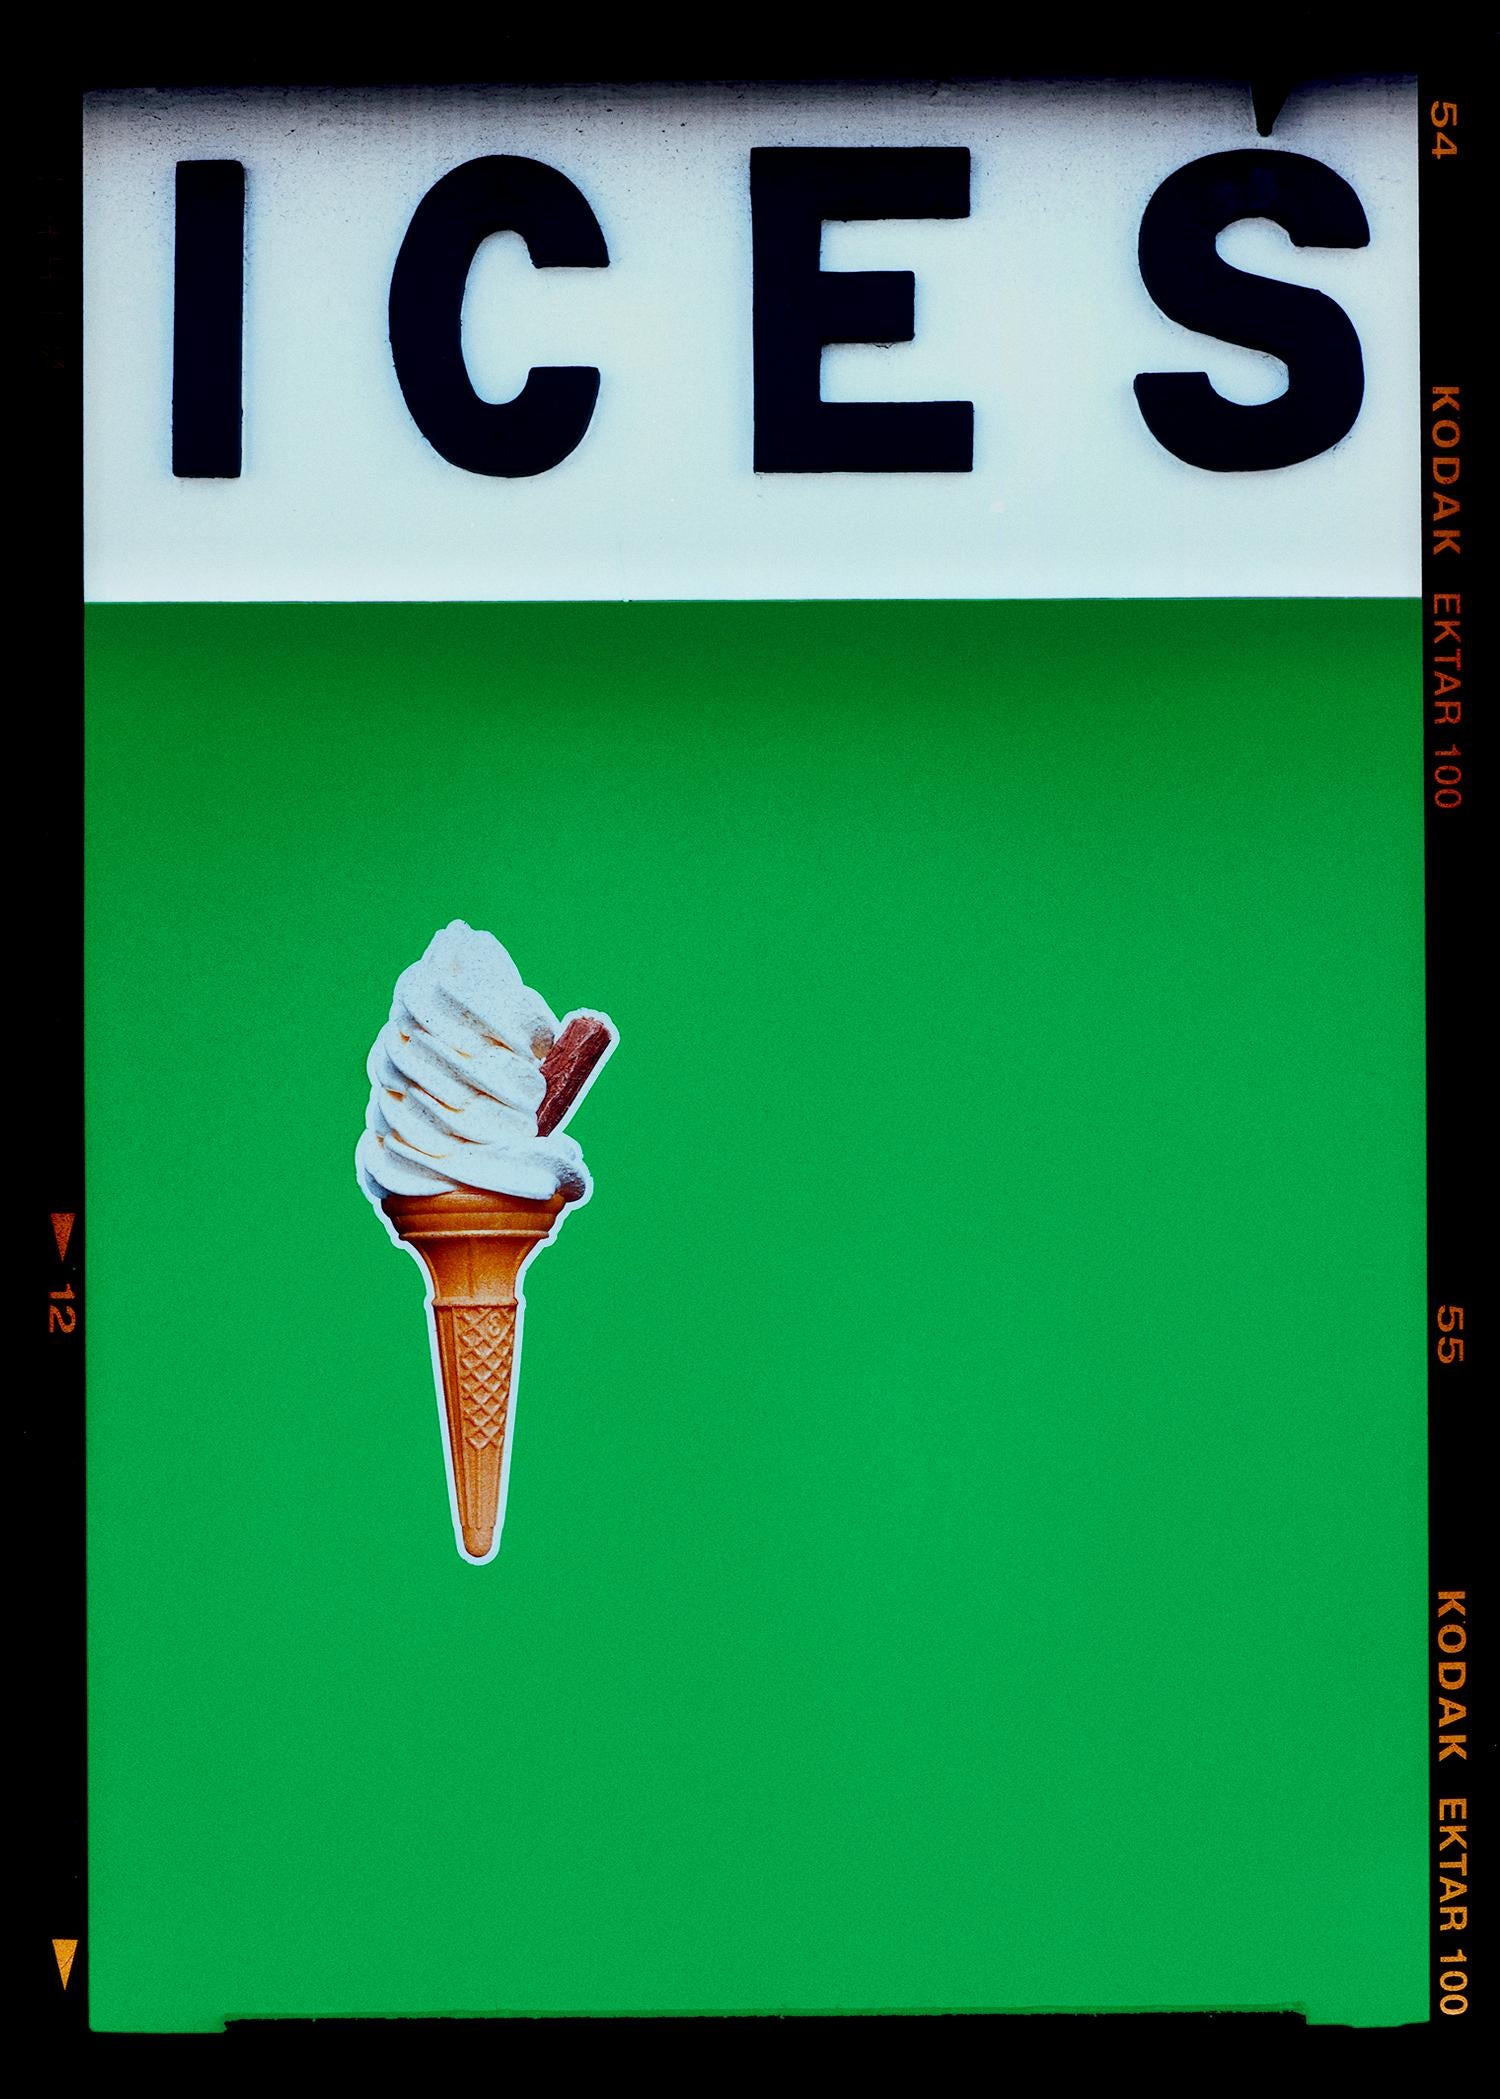 Richard Heeps Color Photograph - Ices (Green), Bexhill-on-Sea - British seaside color photography